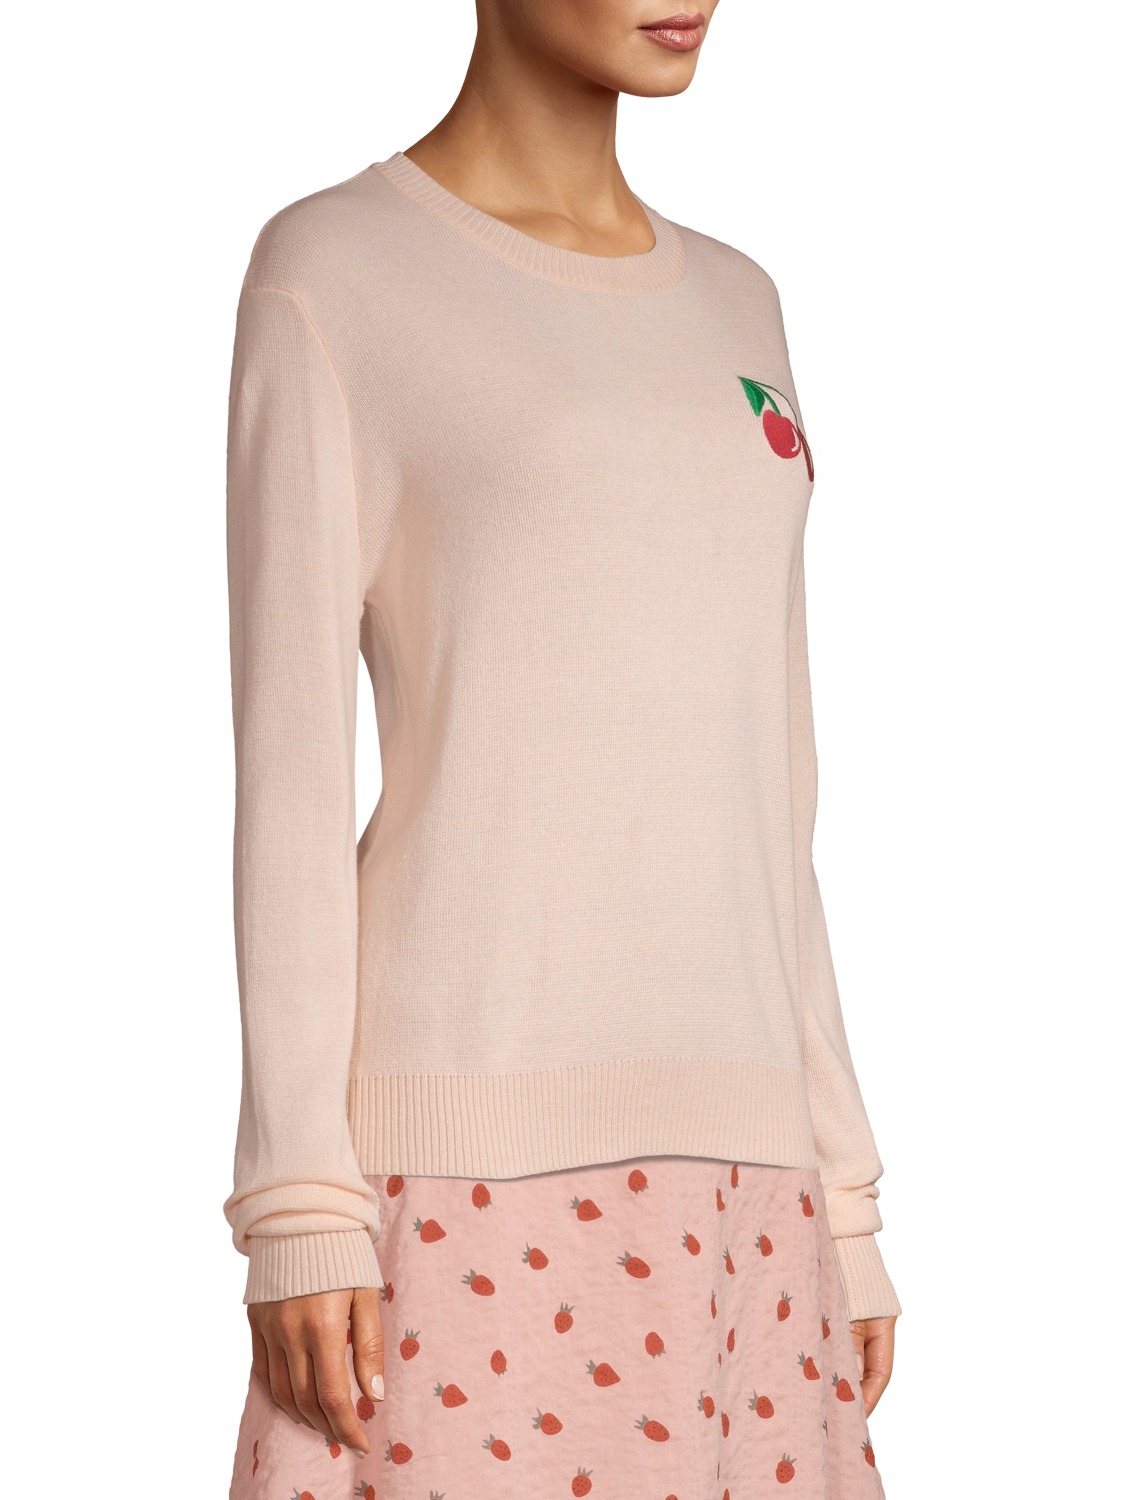 Love Sadie Women's Embroidered Sweater - image 6 of 7